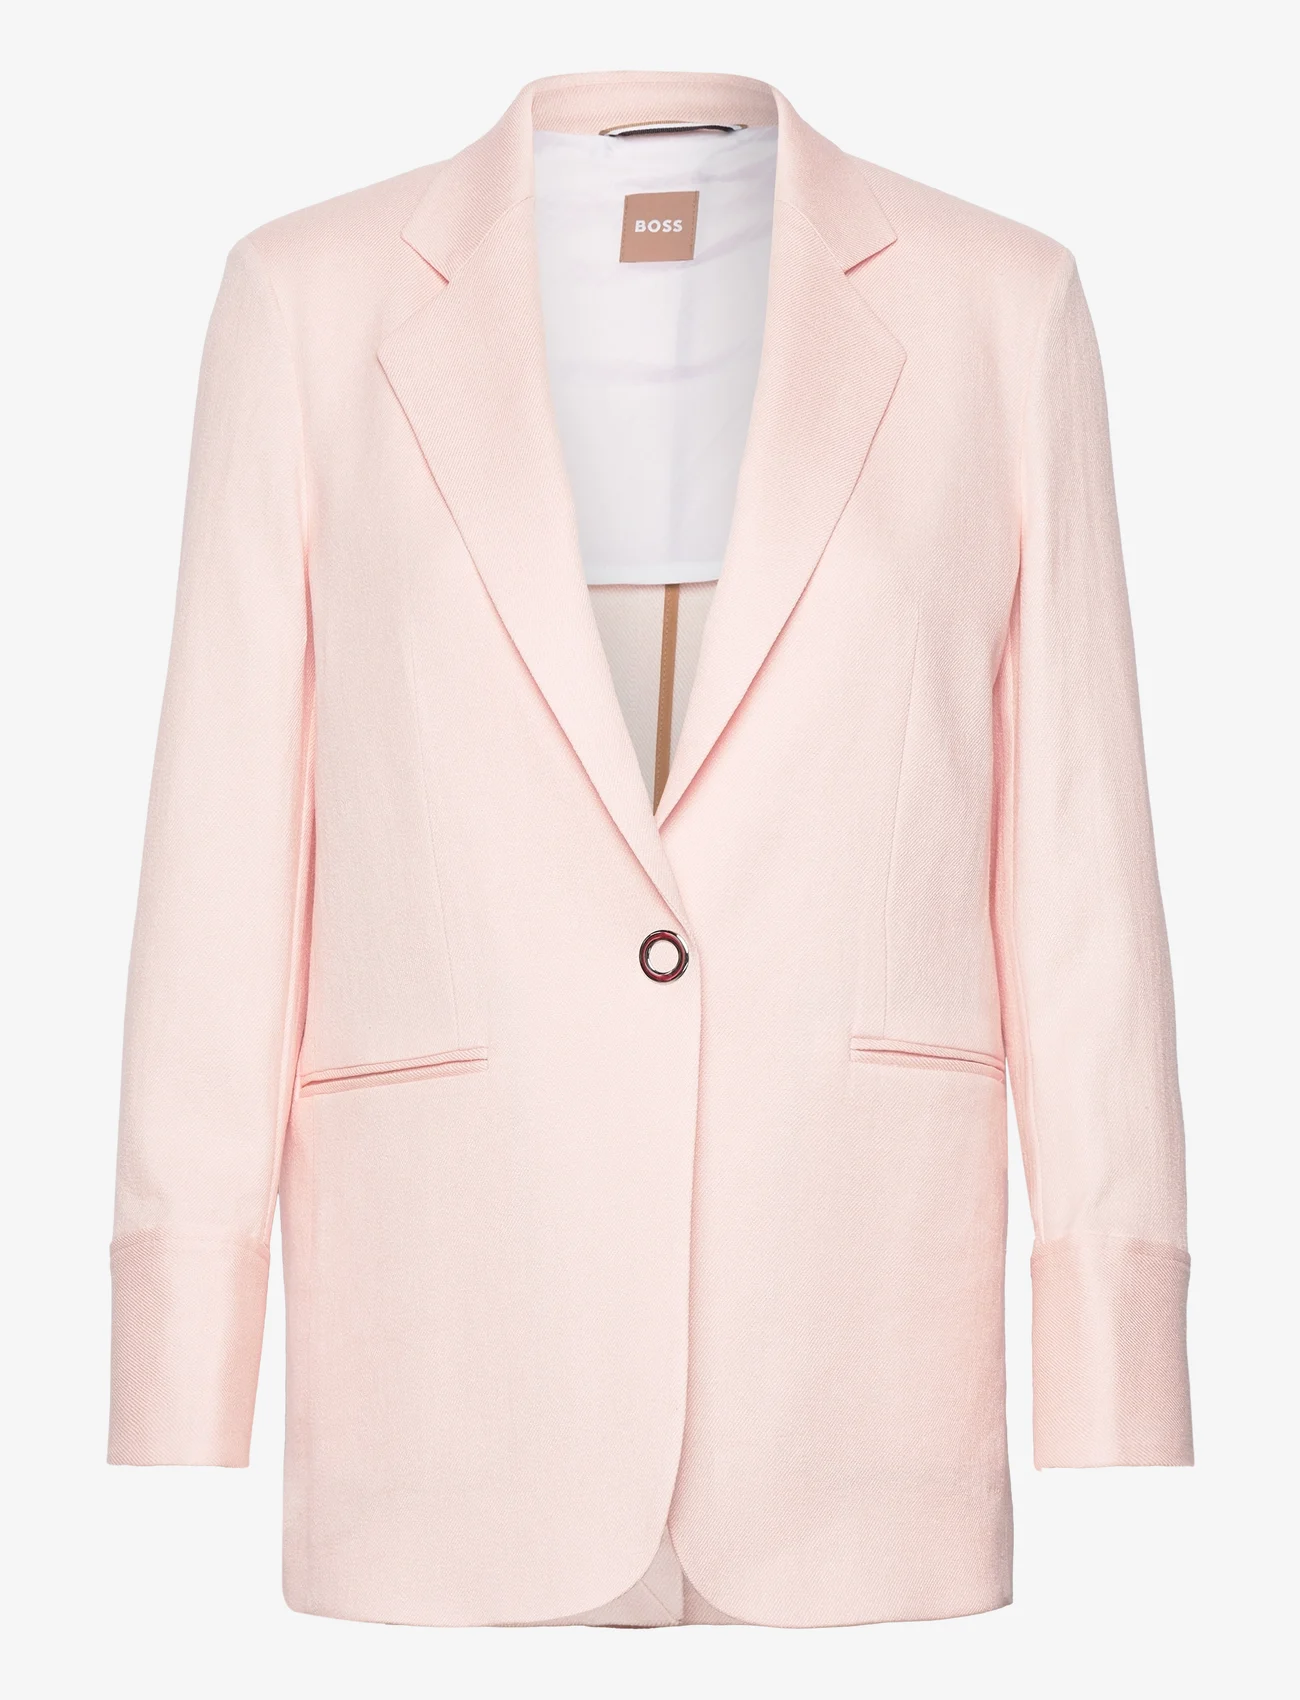 BOSS - Jodhi - party wear at outlet prices - bright pink - 0